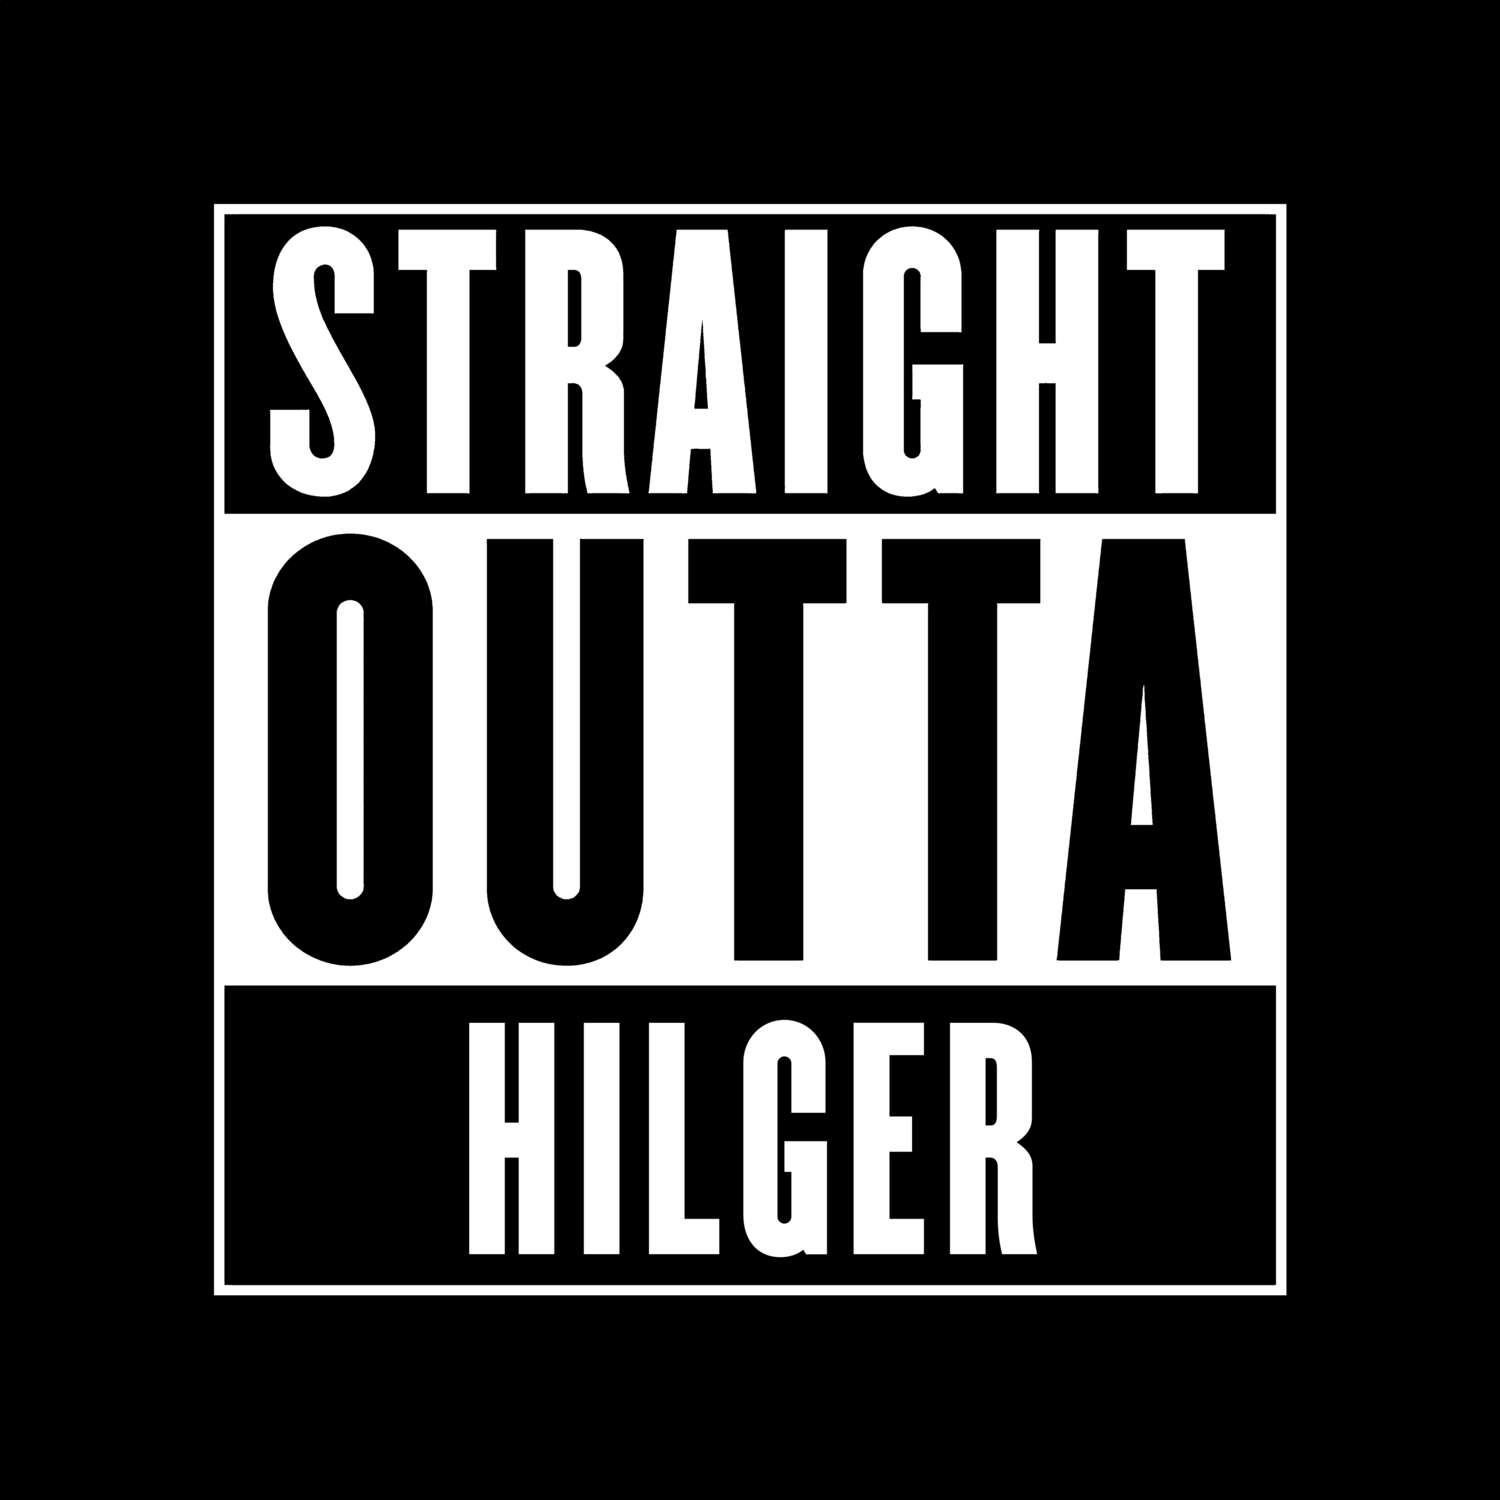 Hilger T-Shirt »Straight Outta«